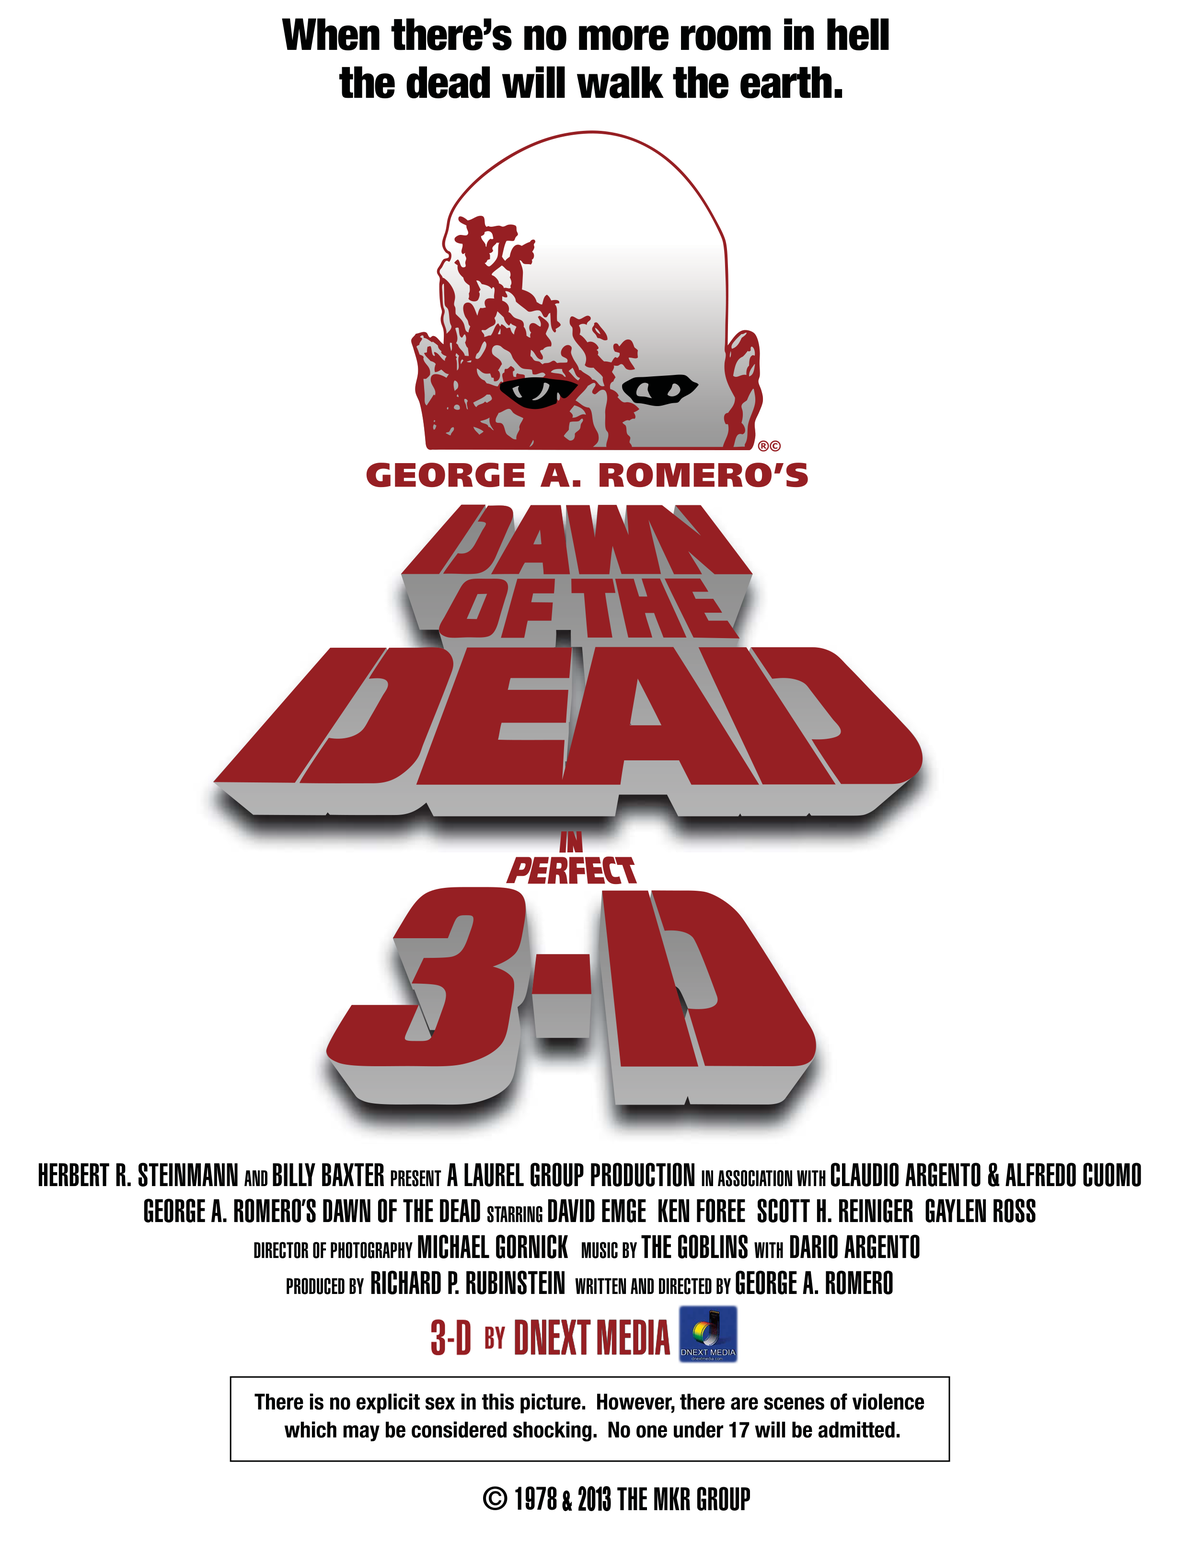 Dawn of the Dead 1978 getting a 3-D re-release in October —